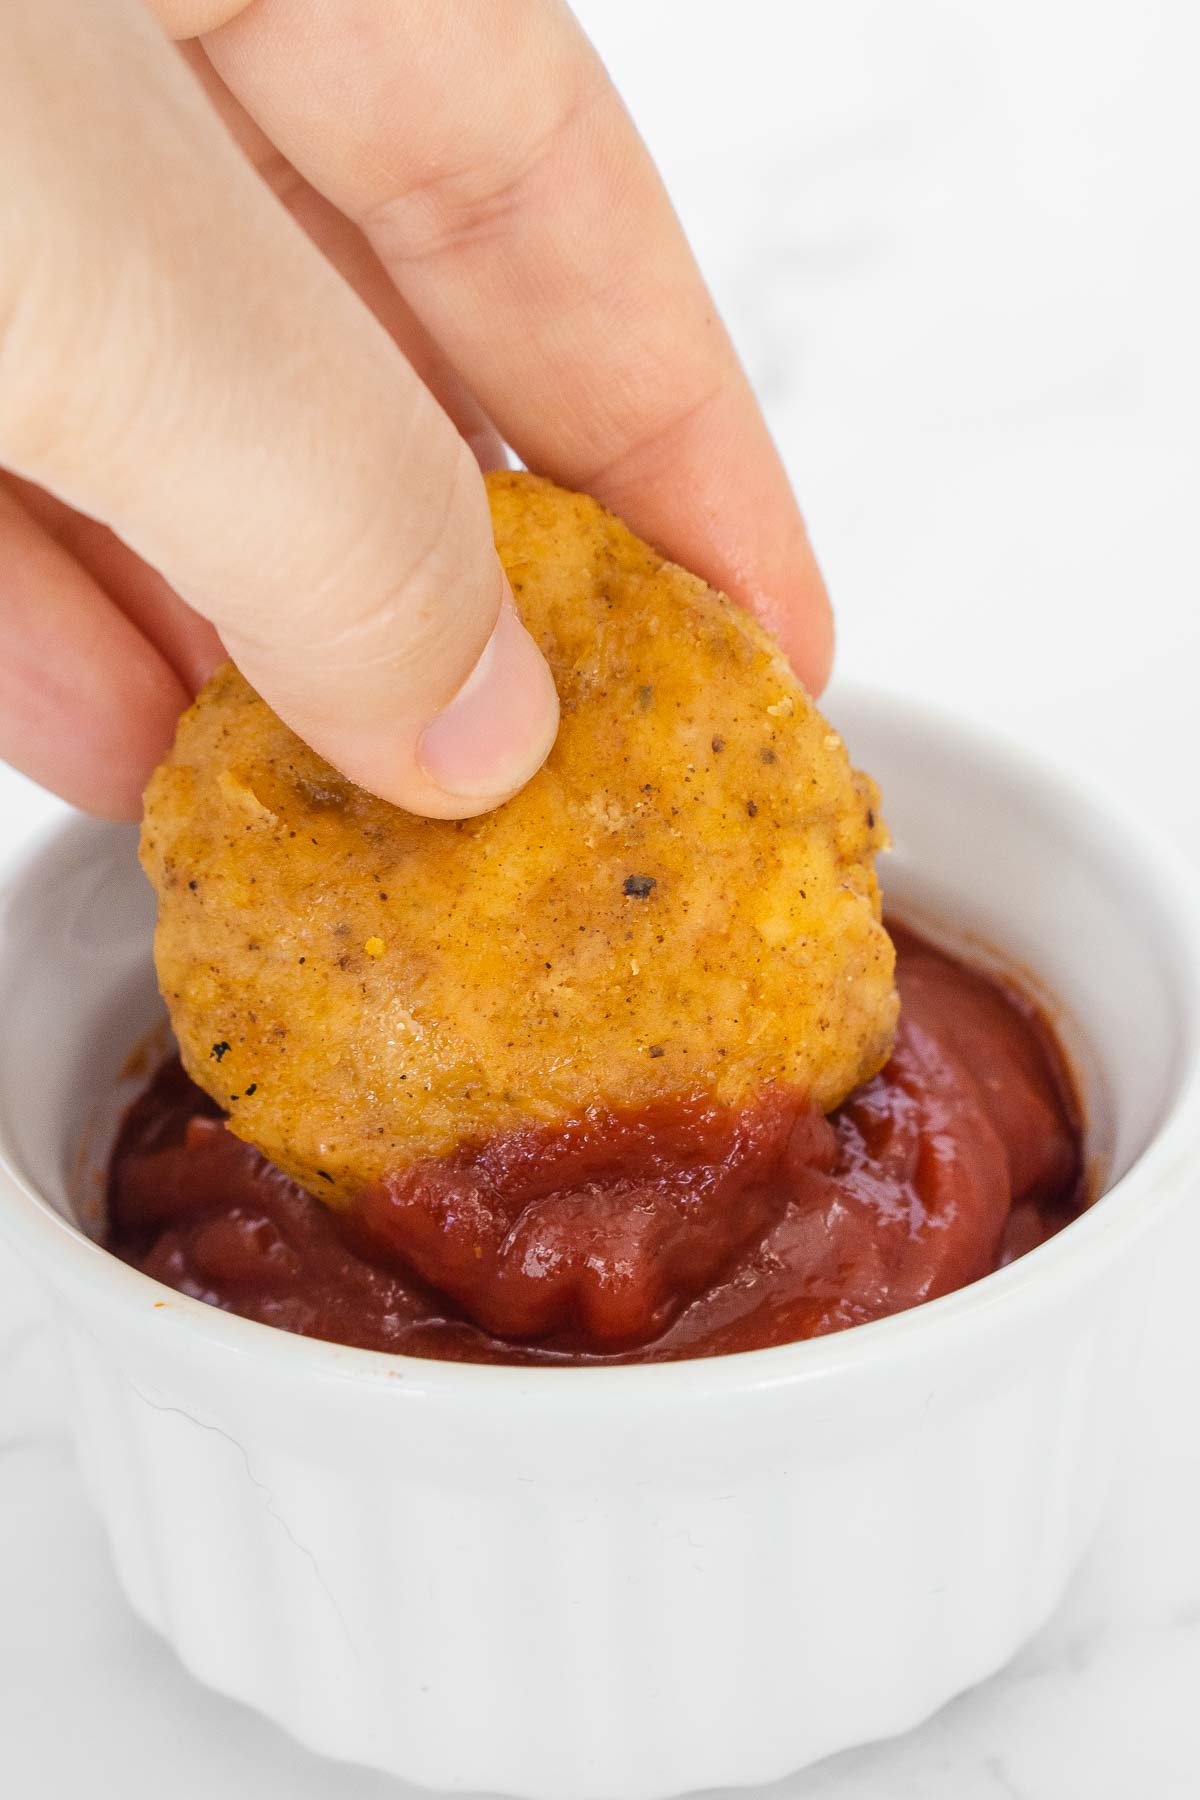 Hand dipping sweet potato chicken nugget in ketchup.